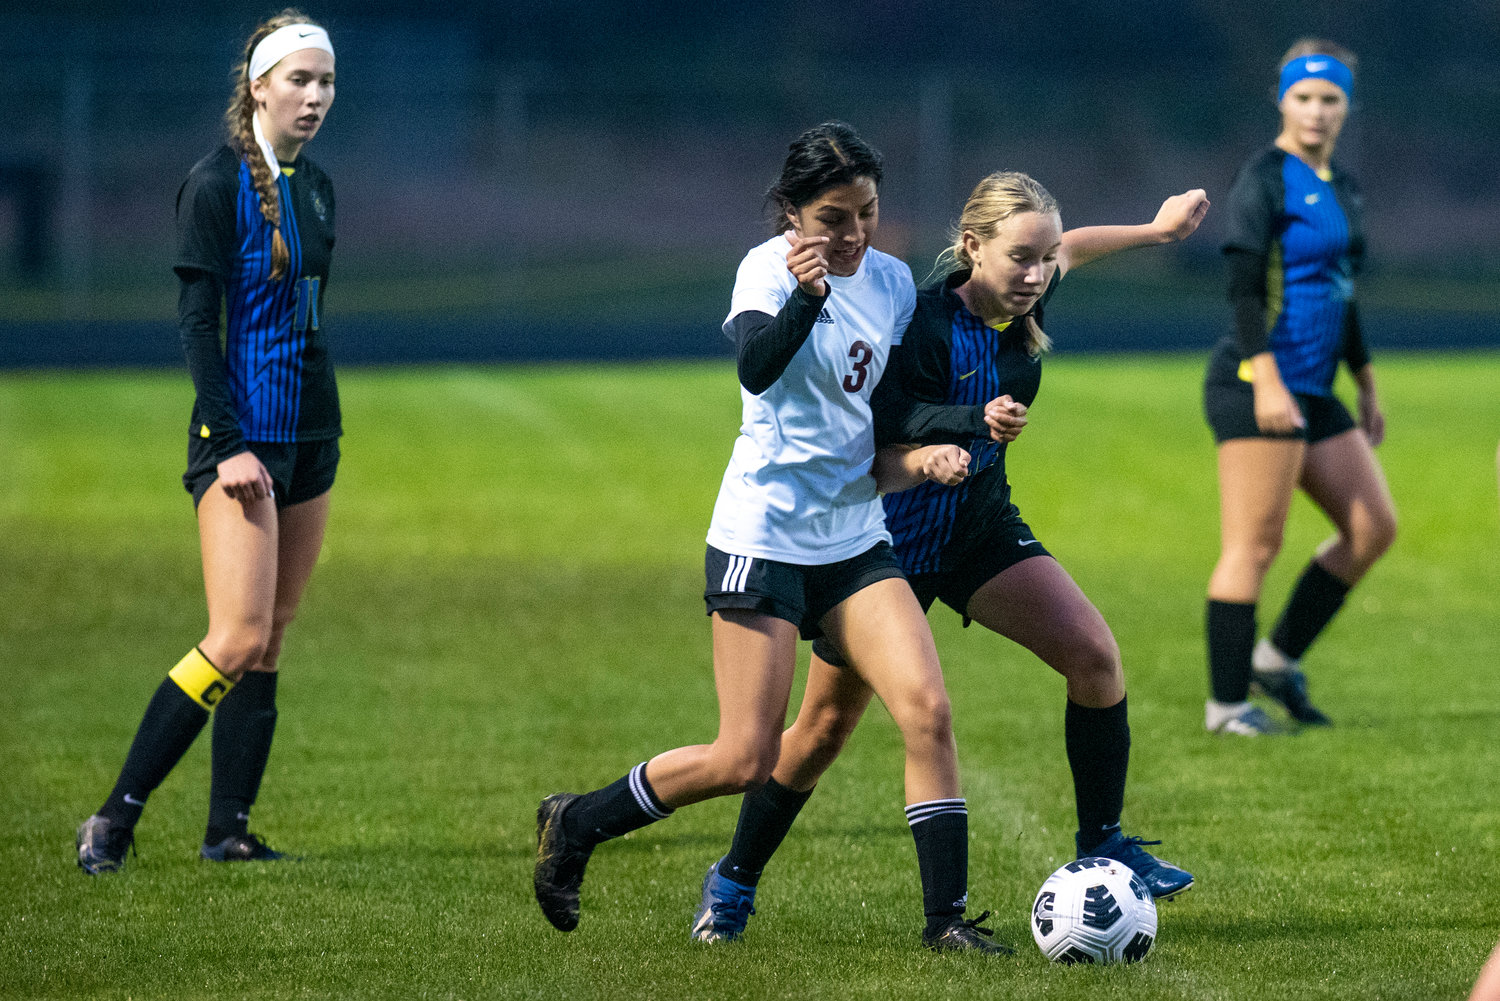 Adna's Lilly Wellander (12) battles with a Raymond-South Bend player for possession on Oct. 13, 2021.